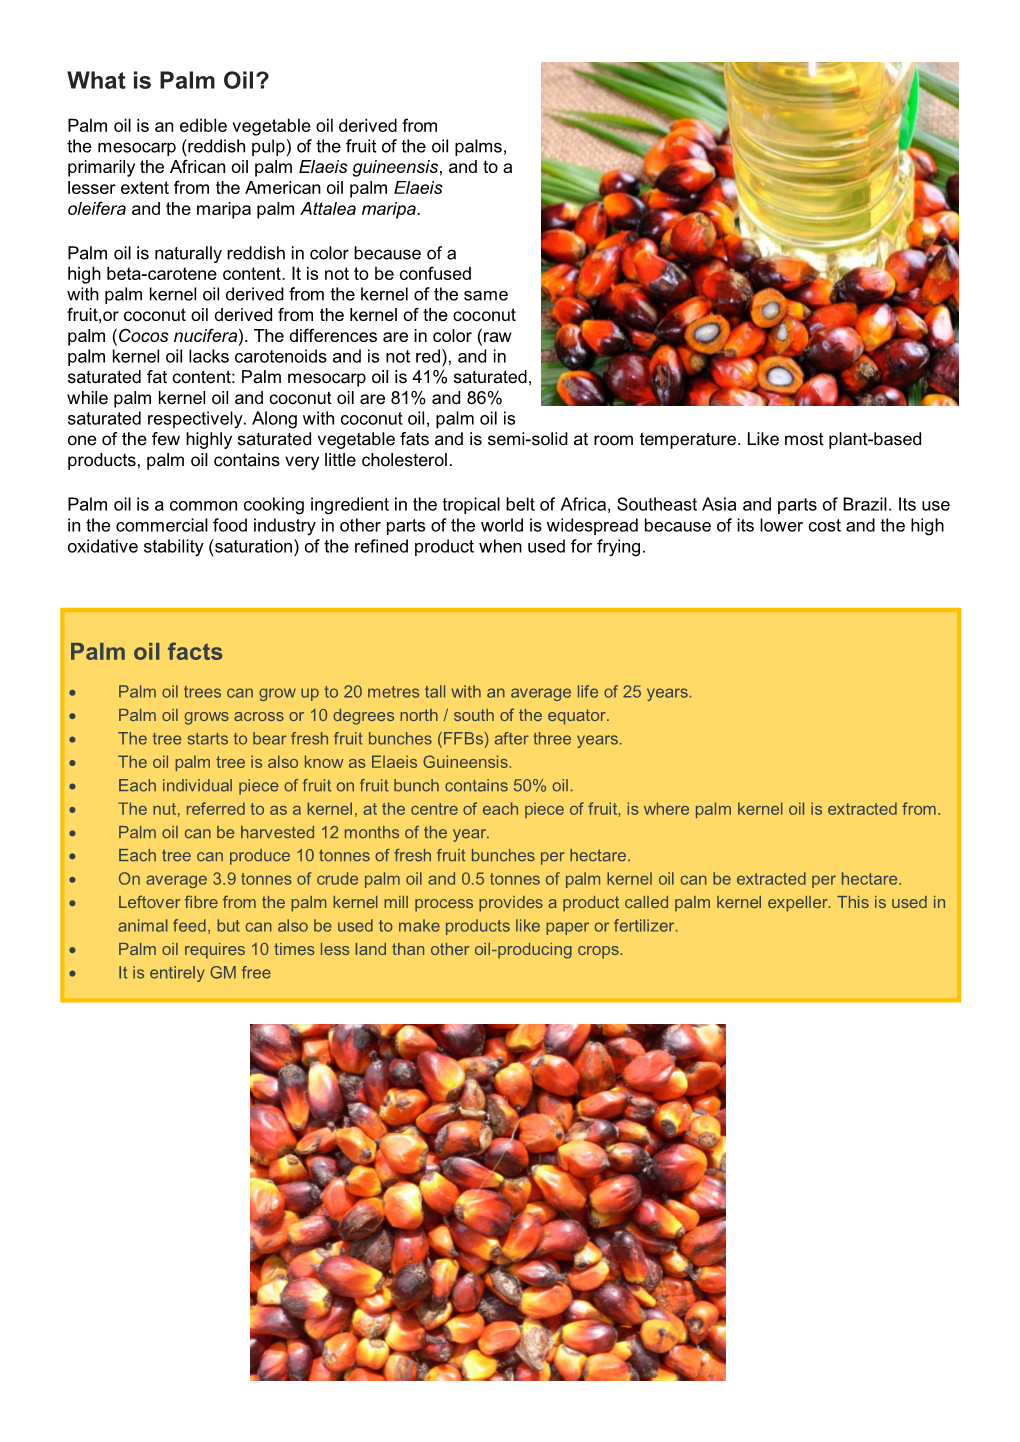 Palm Oil Facts